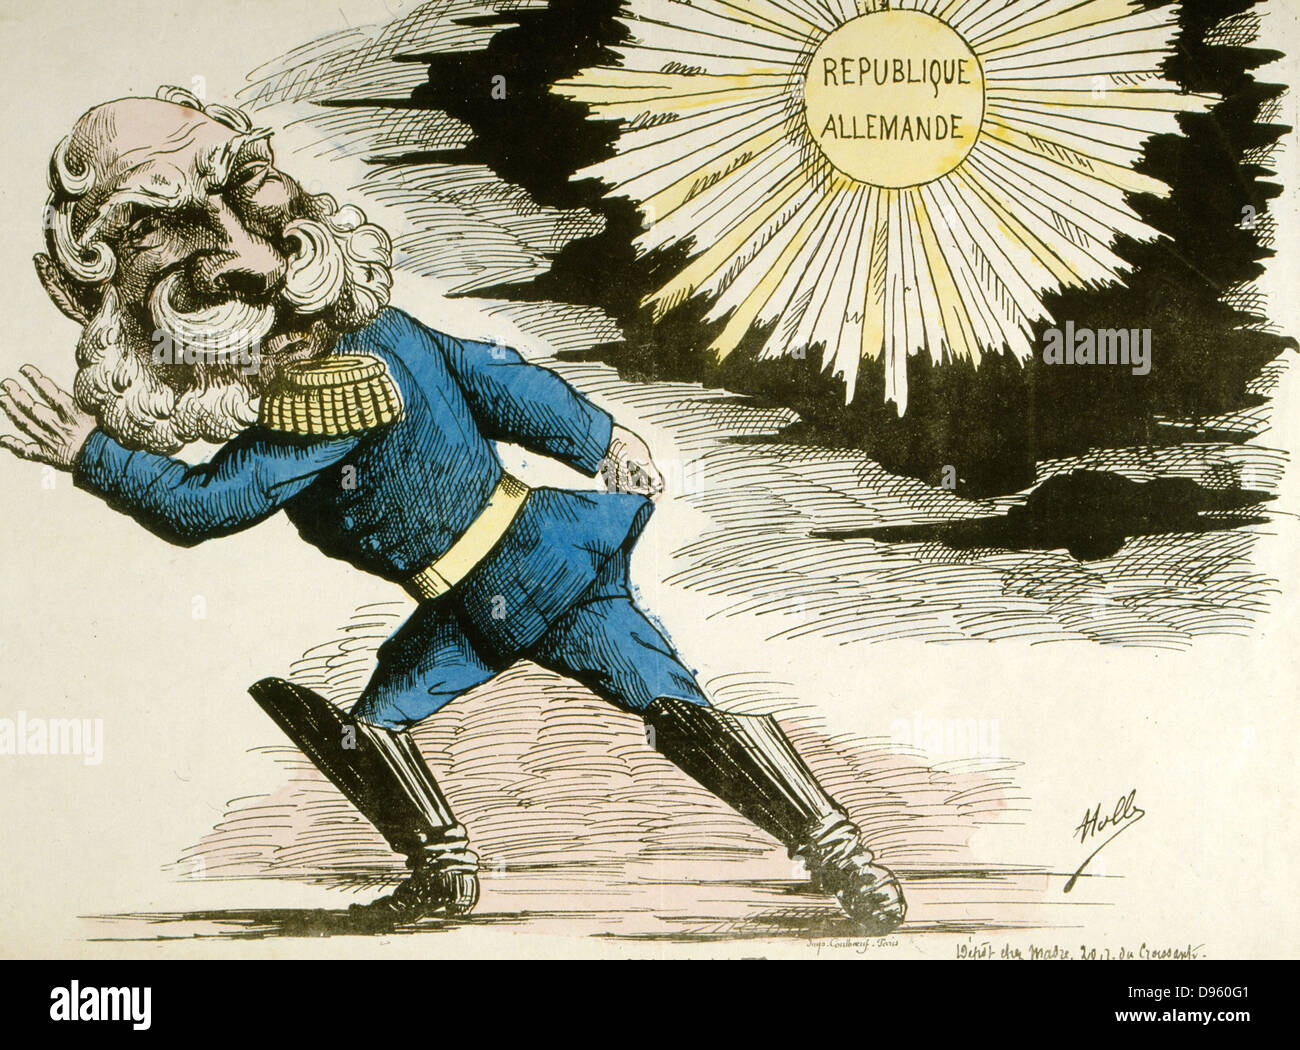 William I Emperor of Germany from 1871 (King of Prussia from 1861) smiling at the rising sun of a united Germany.  French cartoon. Stock Photo